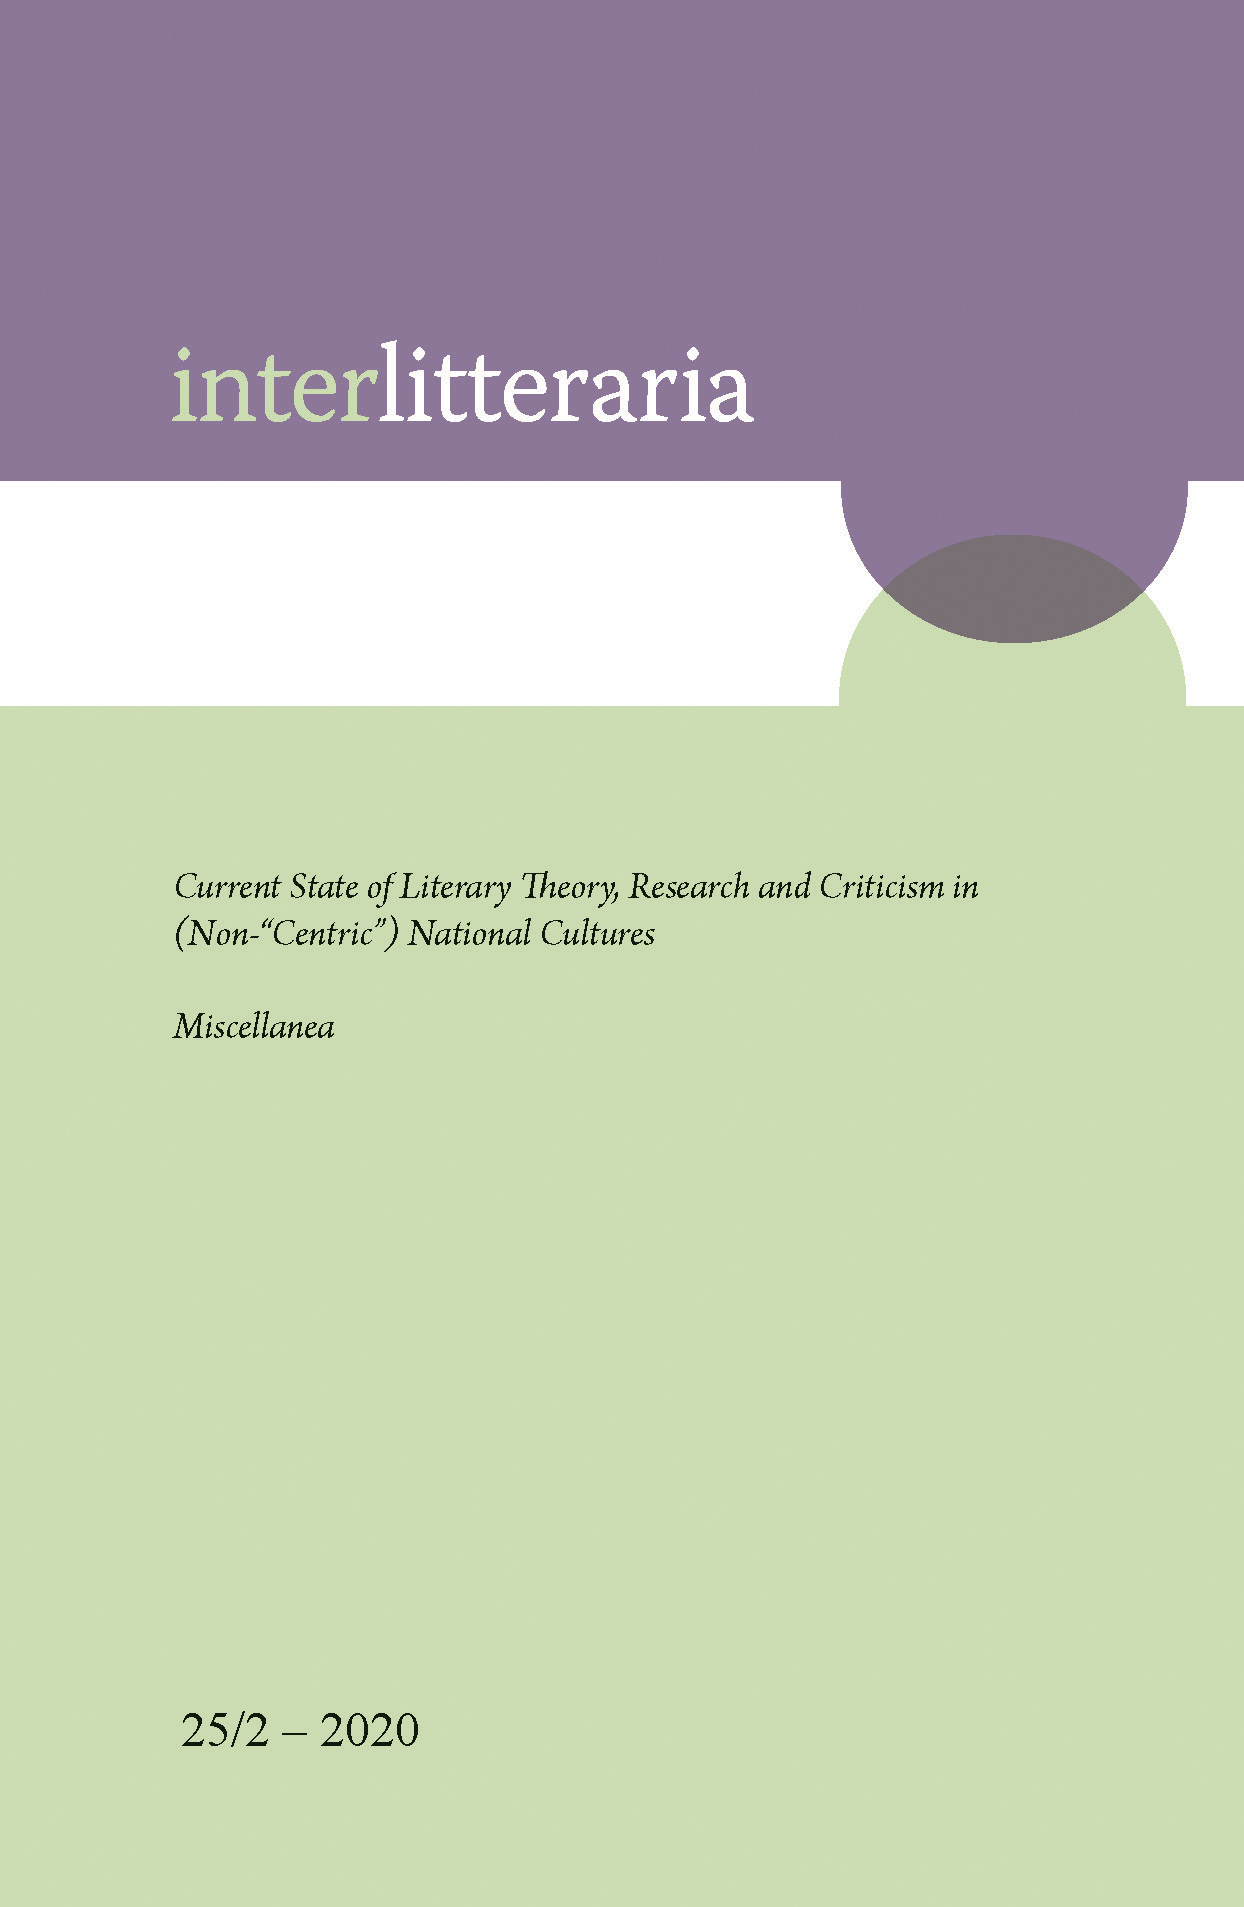 					View Vol. 25 No. 2 (2020): Current State of Literary Theory, Research and Criticism in (Non-“Centric”) National Cultures. Miscellanea
				